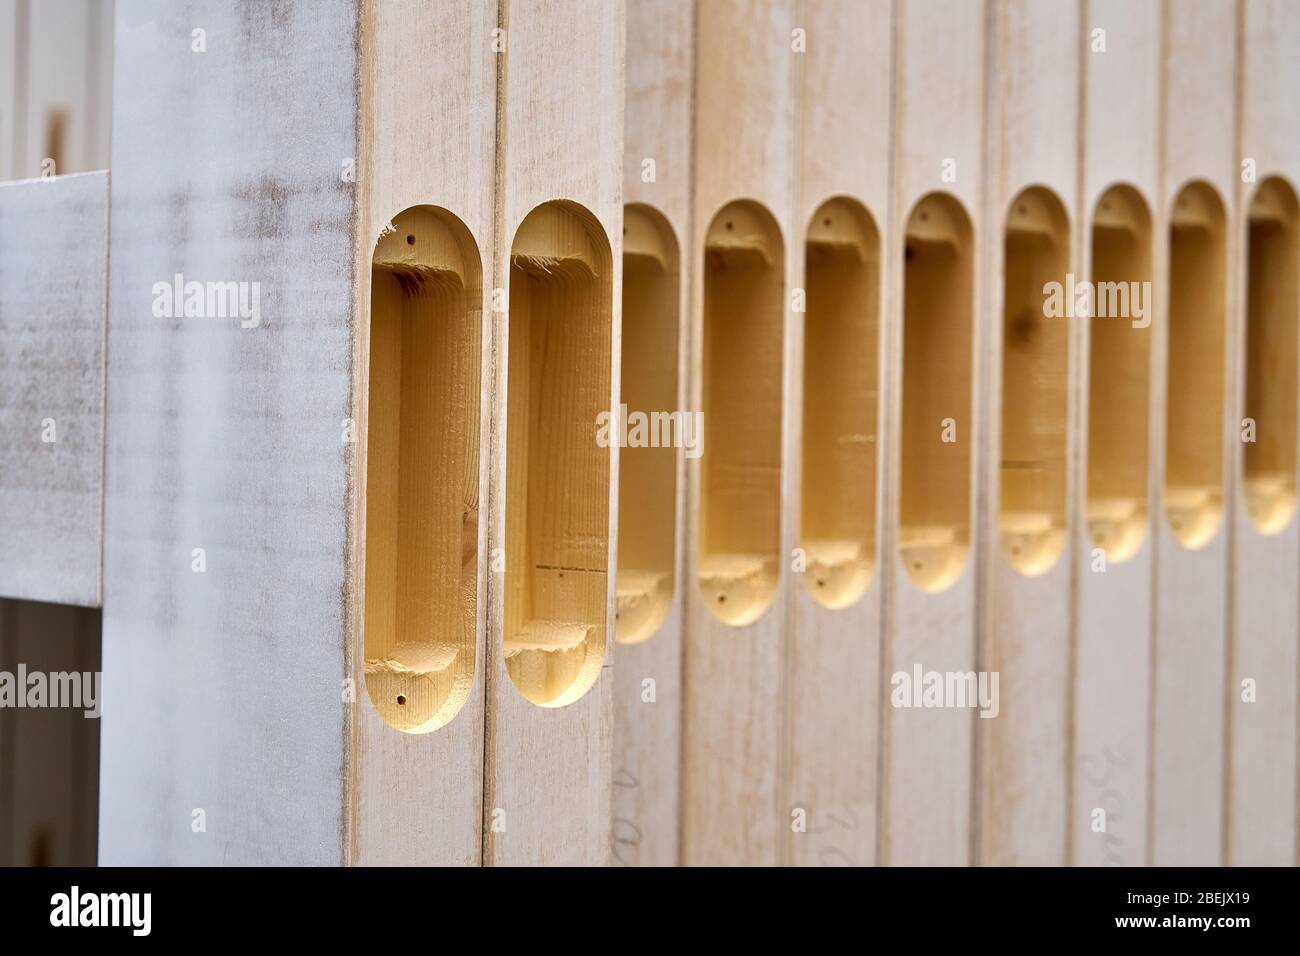 Joinery. Stacked door leafs. Wood door manufacturing process. Woodworking and carpentry production. Furniture manufacture. Close-up Stock Photo